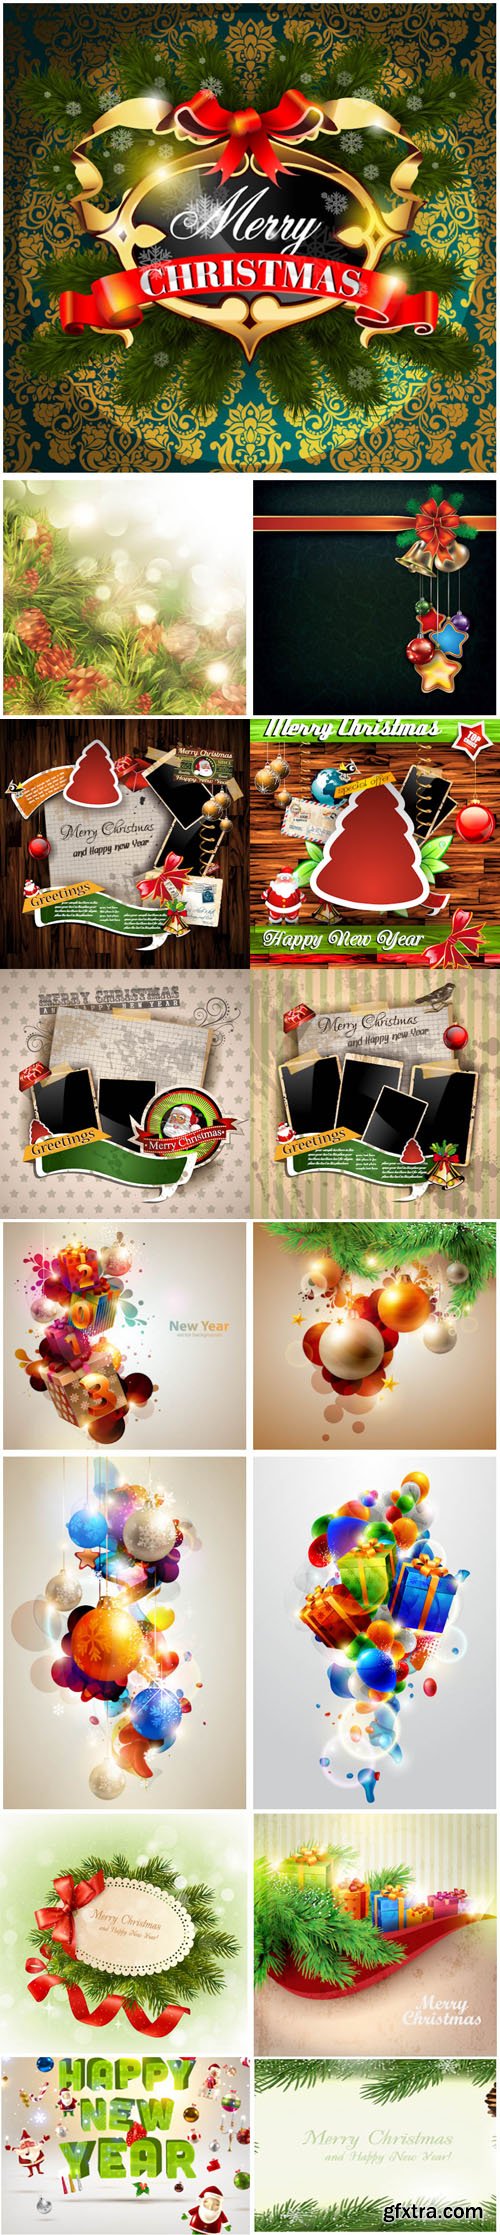 Merry Christmas & New Year 2017 Compositions Vector